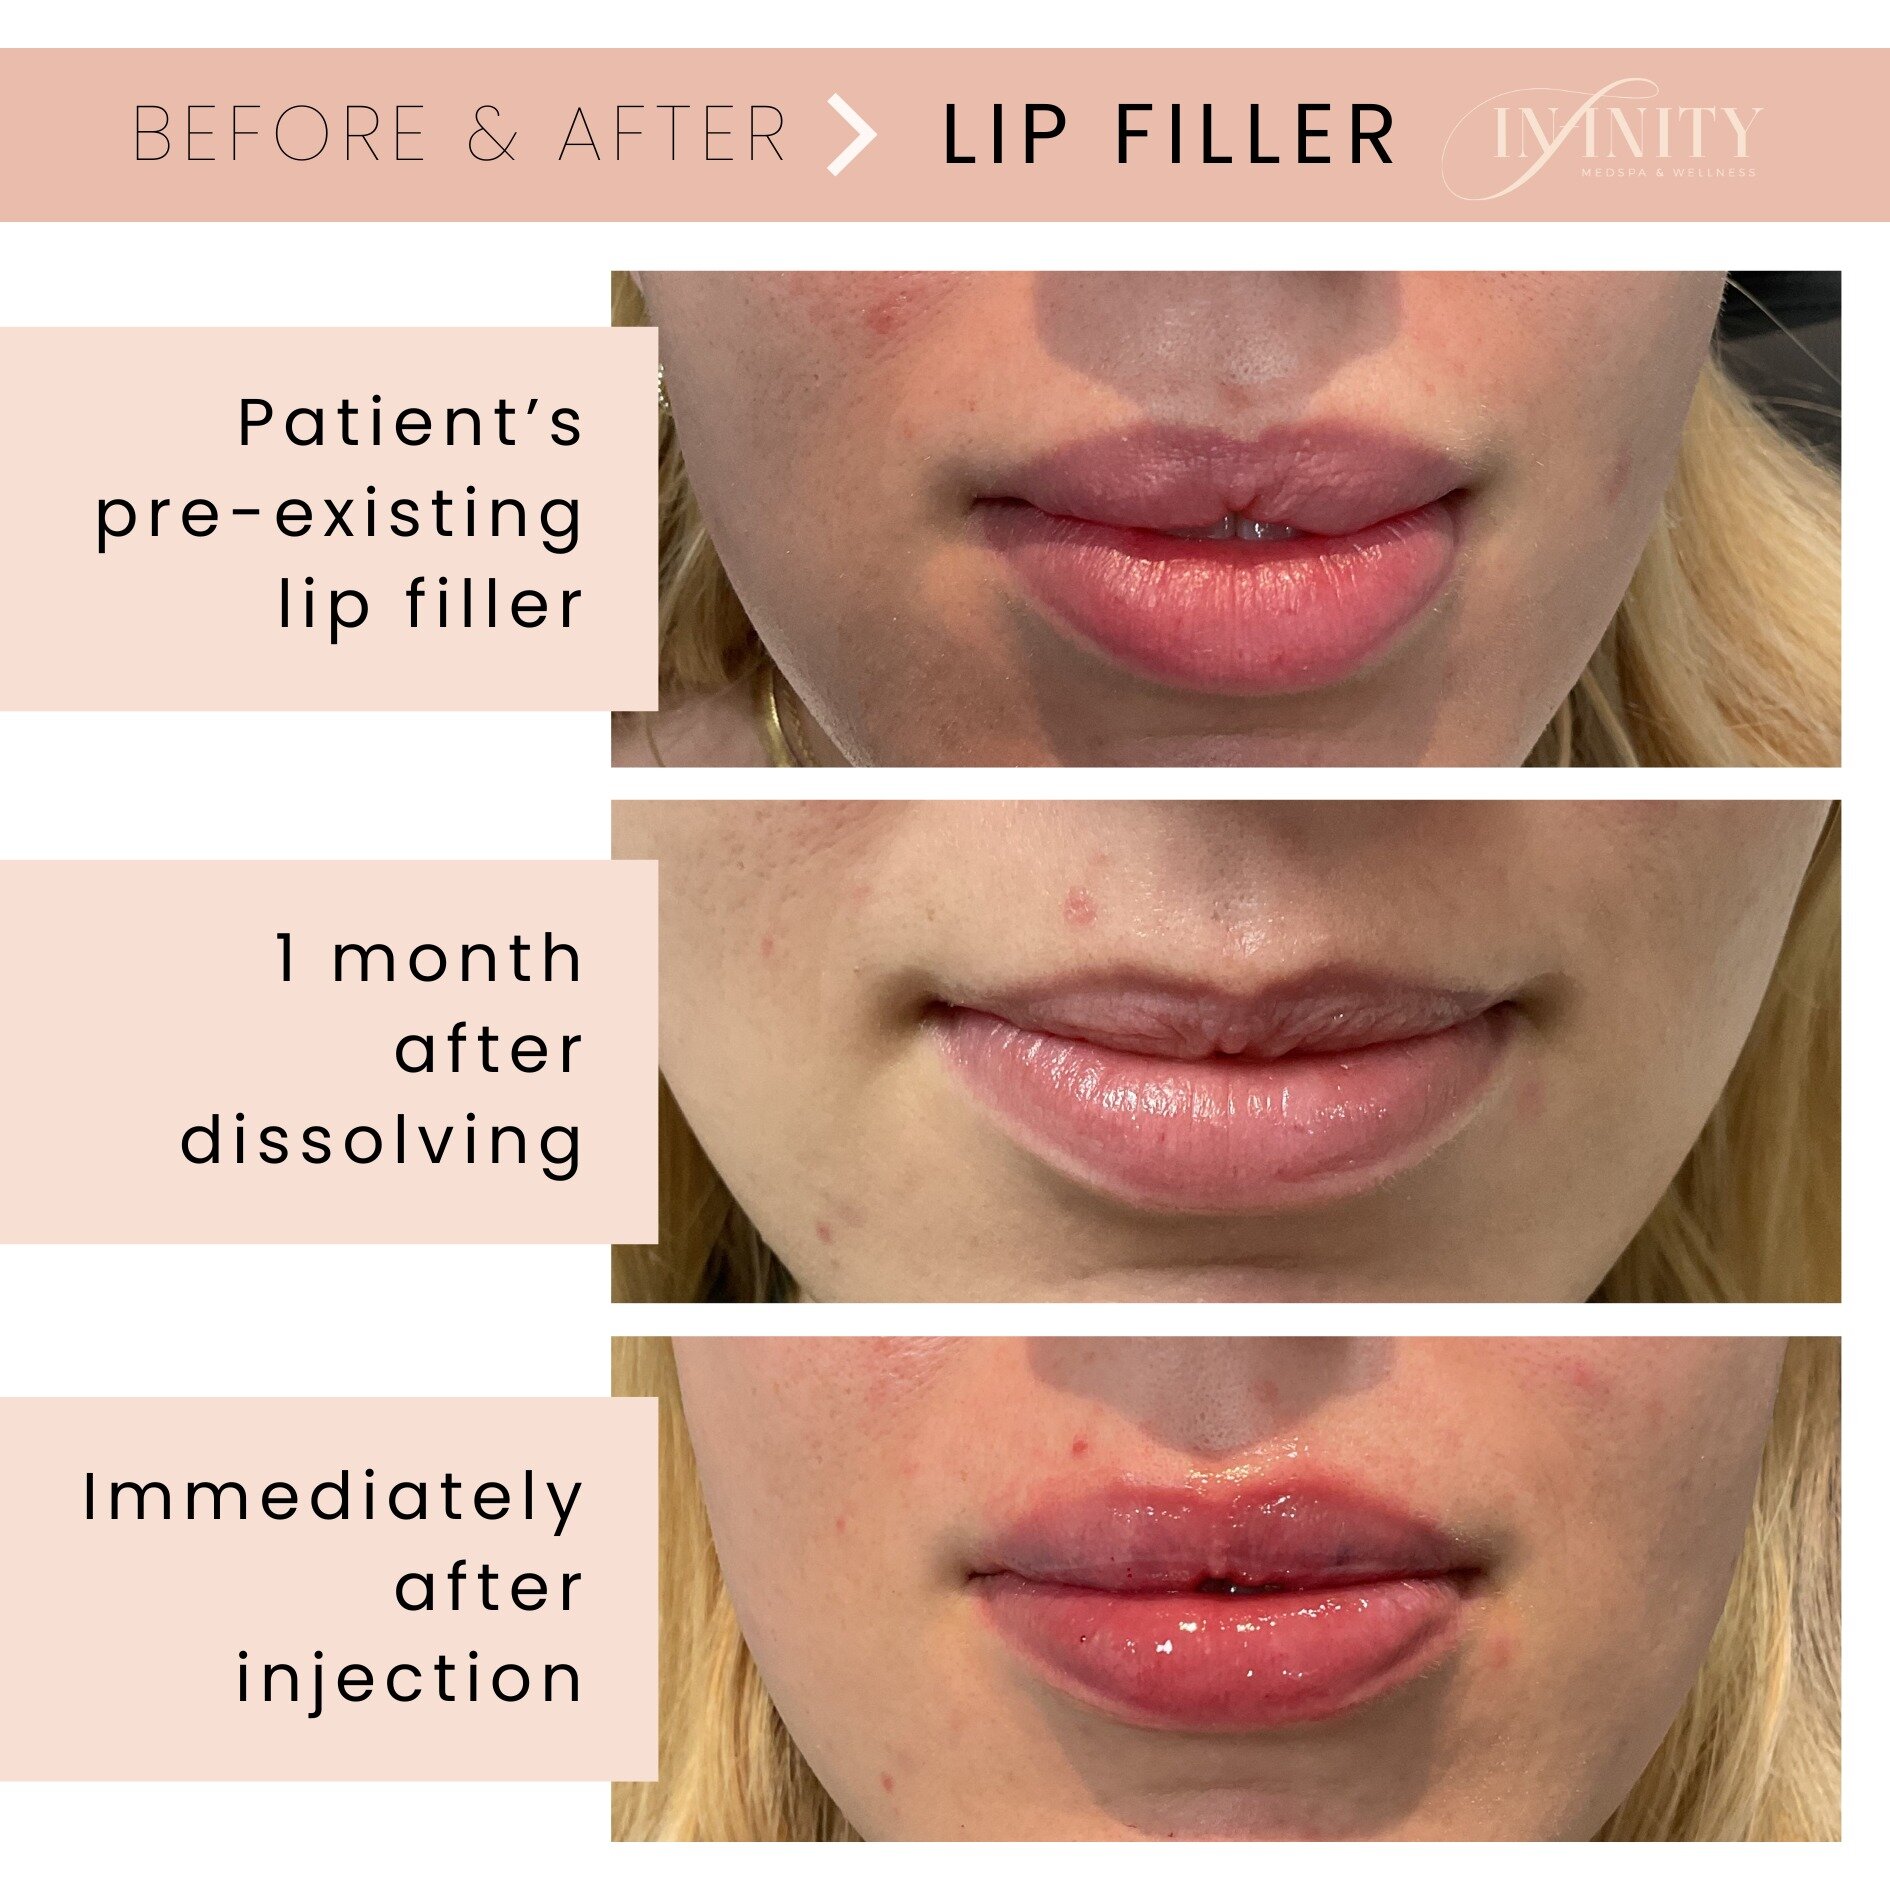 Every new patient with pre-existing lip filler gets assessed for migration &amp; over filling!

Our Providers will not add additional filler if they have concerns of losing the natural shape.

⭐ In this case, the patient had several rounds of lip fil